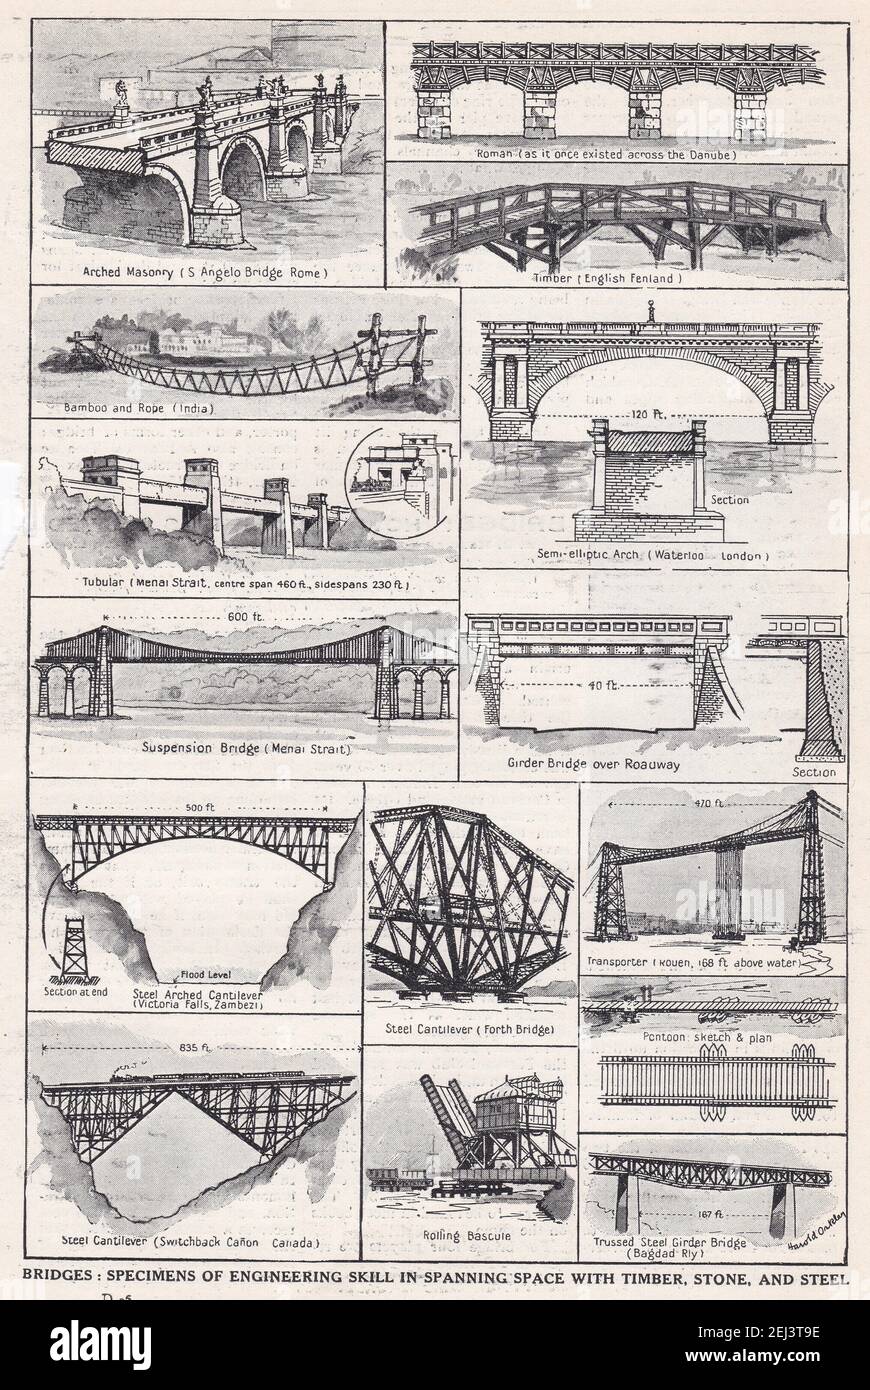 Vintage illustrations of Bridges - Specimens of engineering skill in spanning space with timber, stone and steel 1900s. Stock Photo